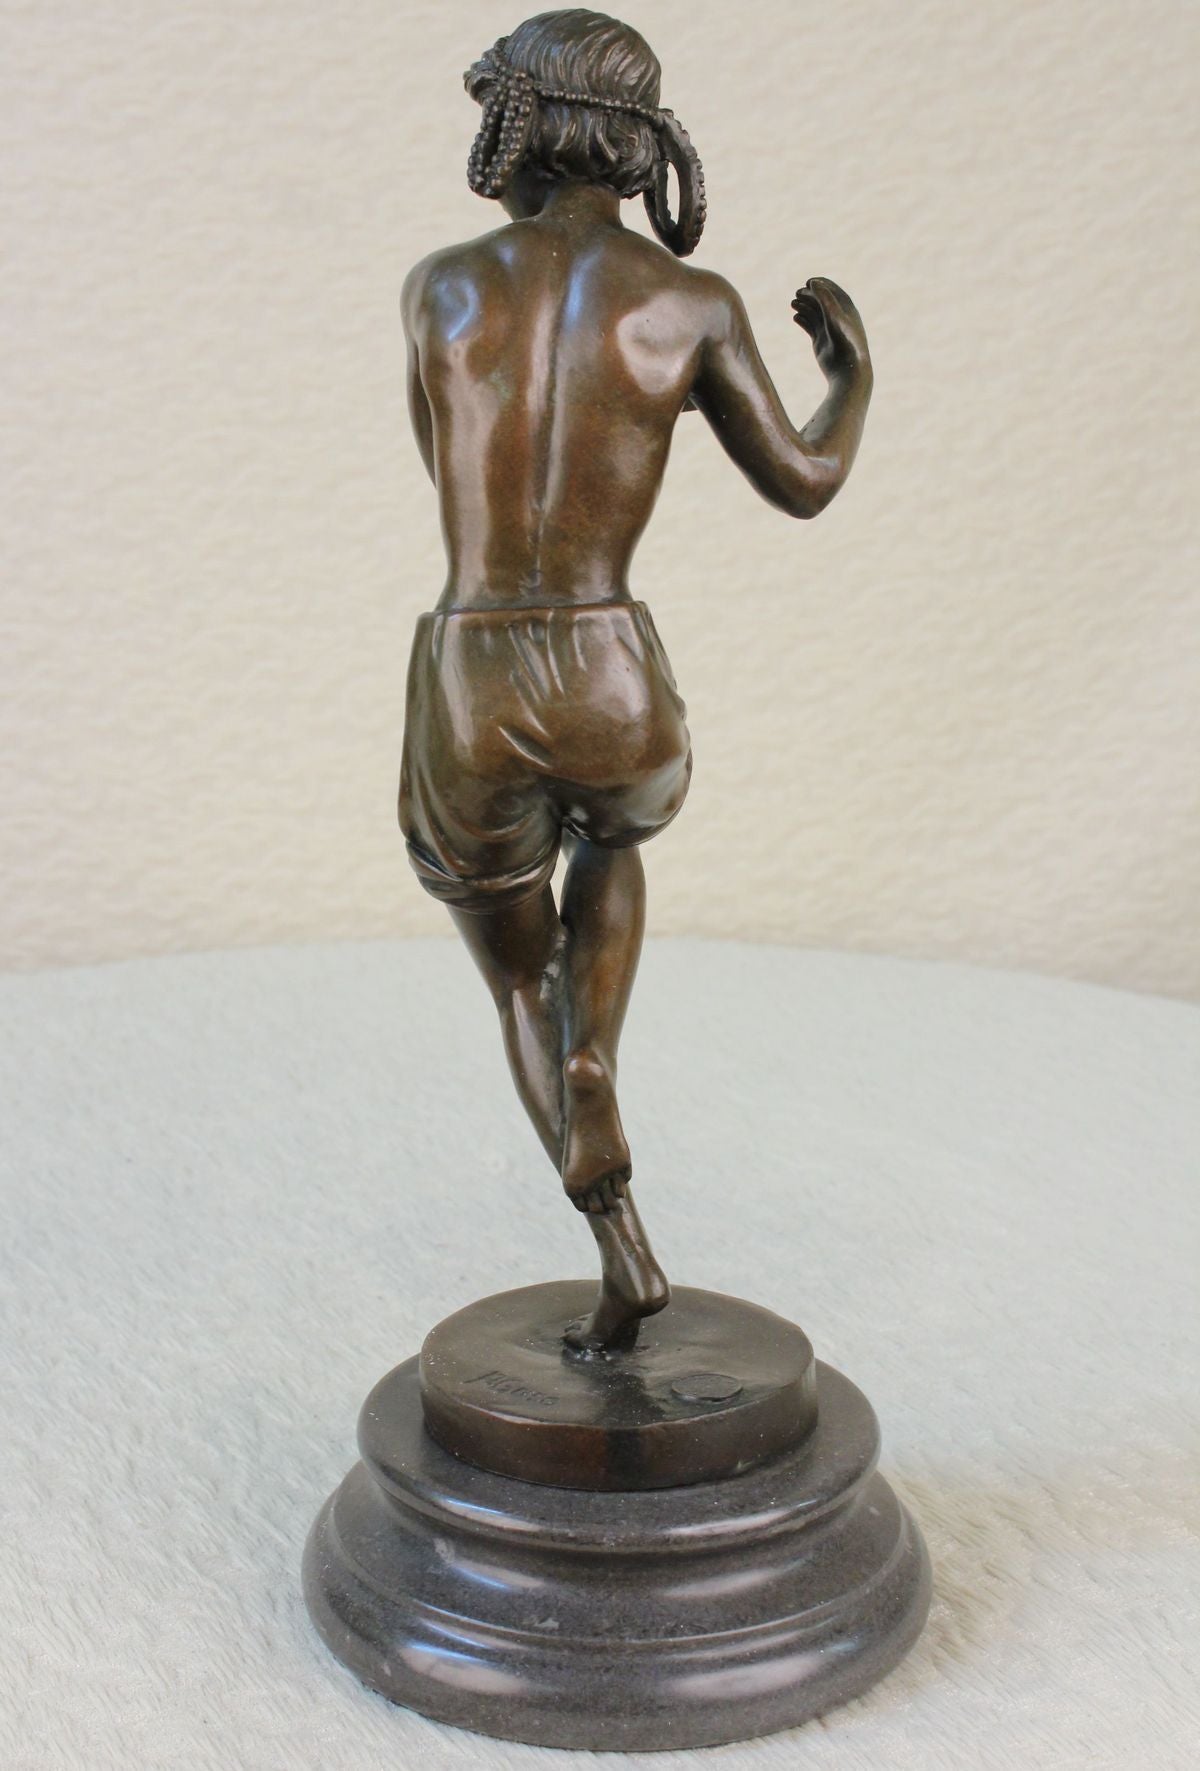 14&quot; Gift Bronze Statue Male Dancer Figures Dancing Signed Marble Base Figurine